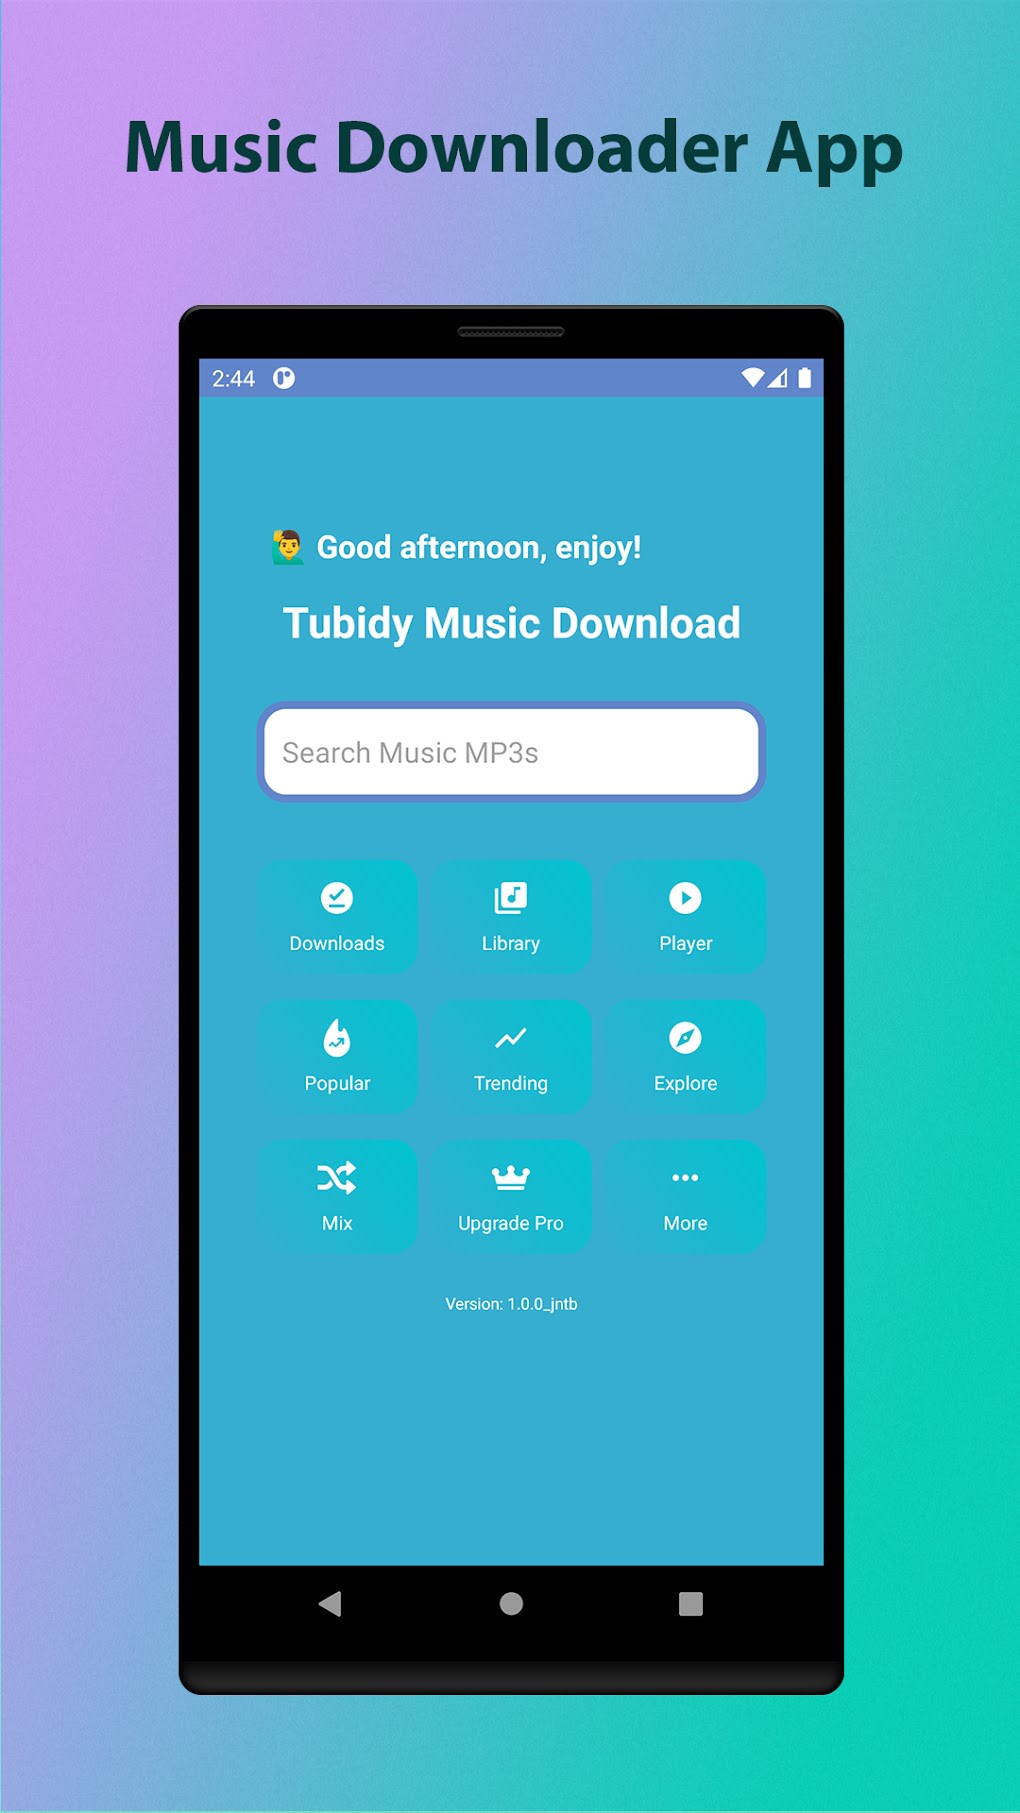 chantal guilbault recommends Tubidy Free Mp3 Search Engine